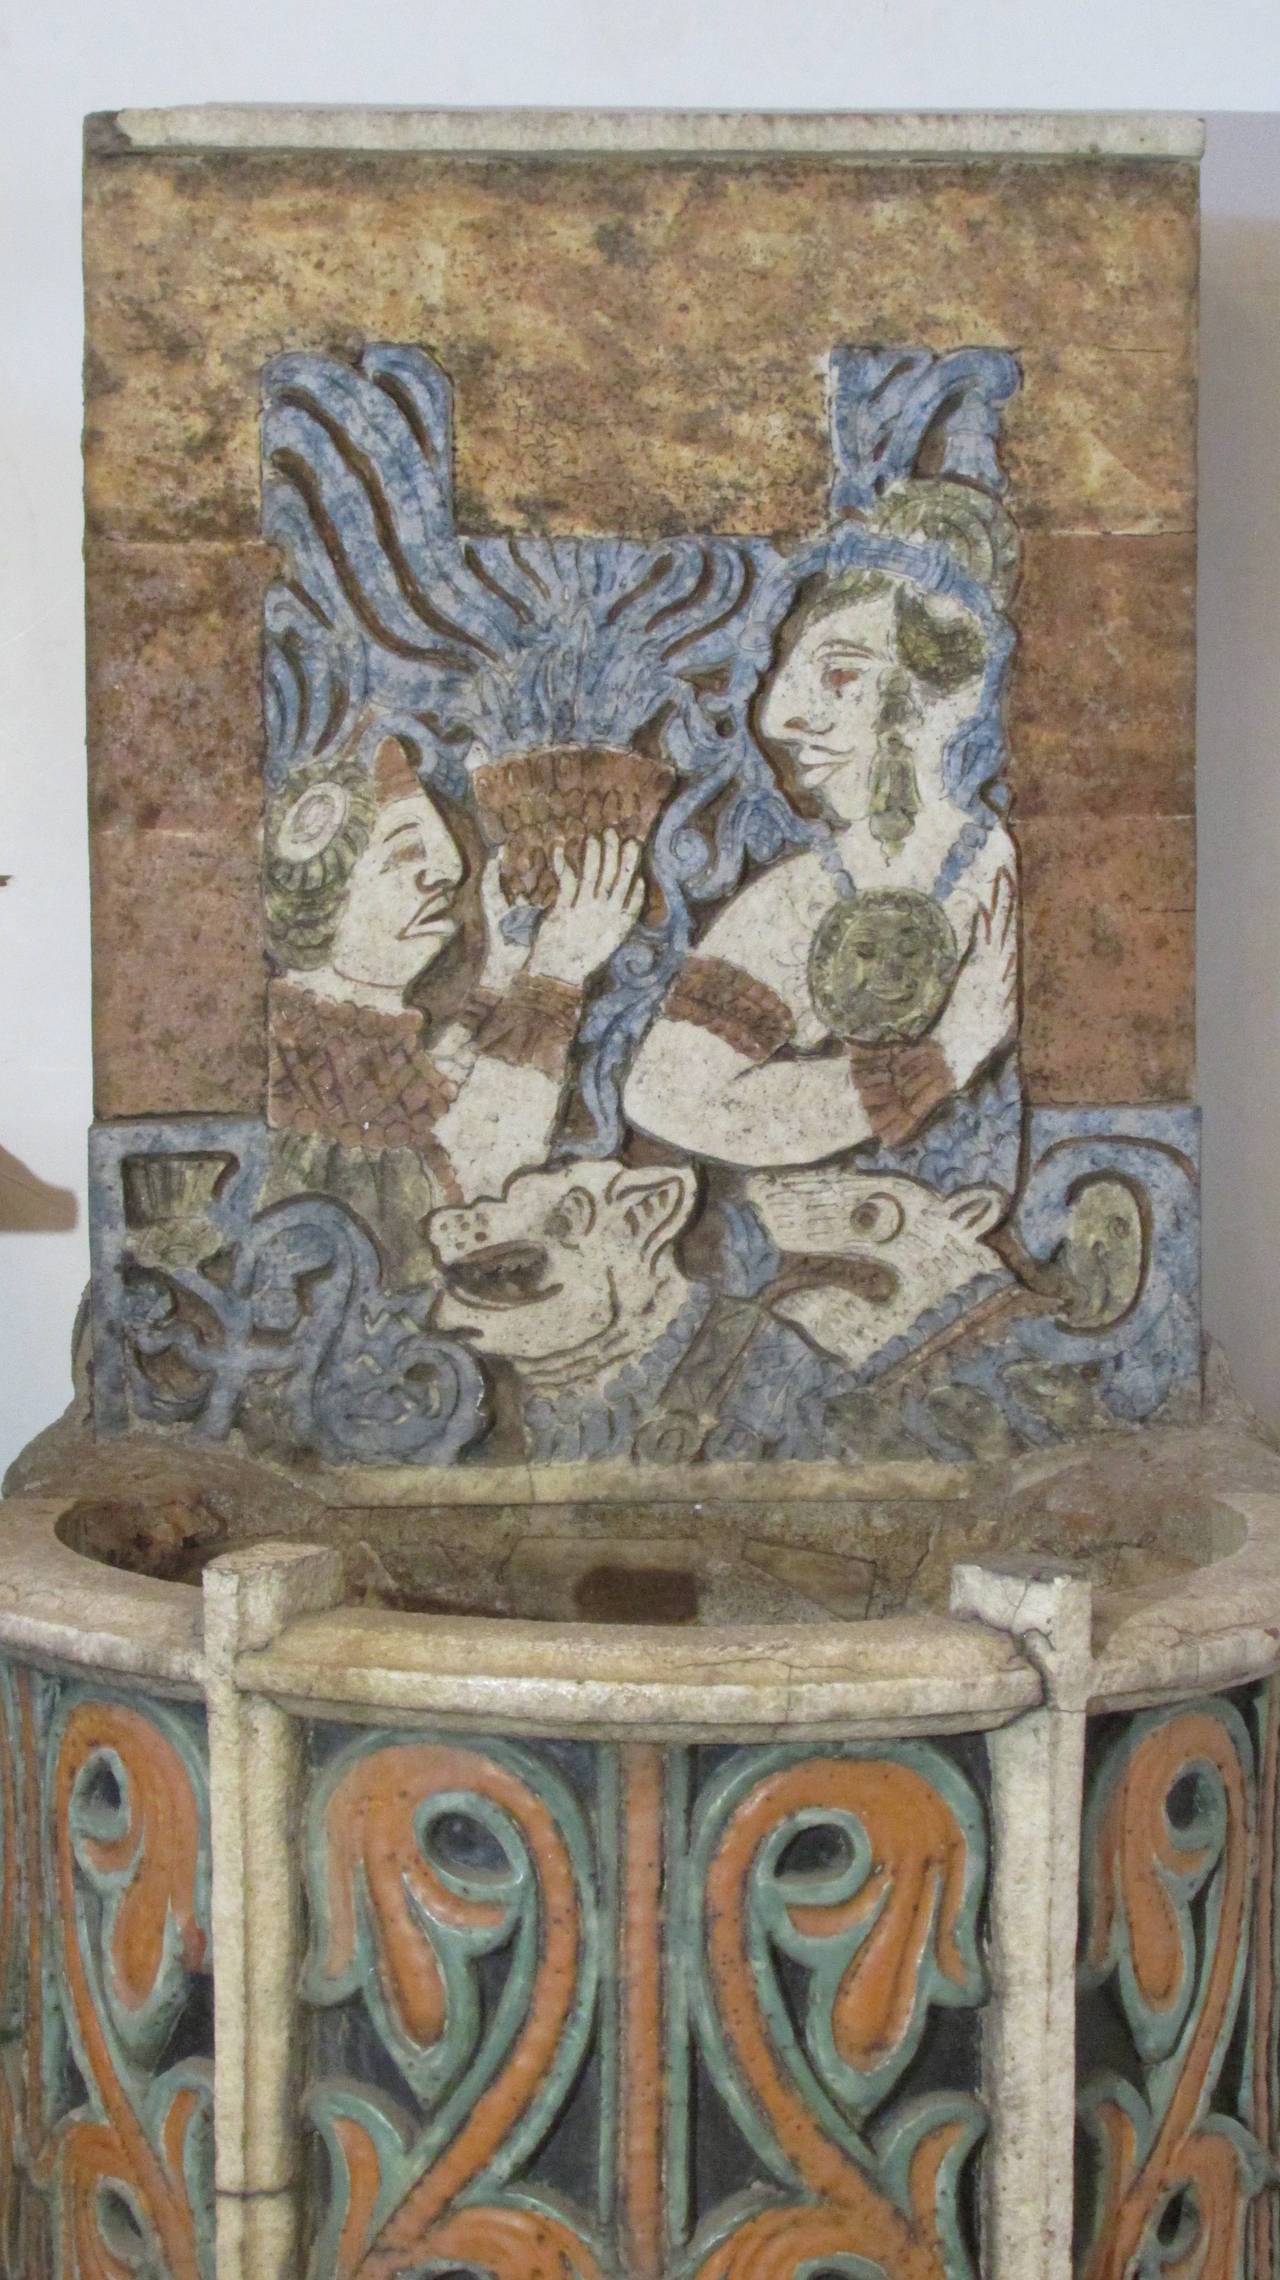 A rare antique polychrome glazed terracotta relief tile wall niche font basin fountain with Spanish Mexican Aztec Mayan figures dog's gods - direct from a Western NY family and purchased in the early 20th century at an estate liquidation auction.